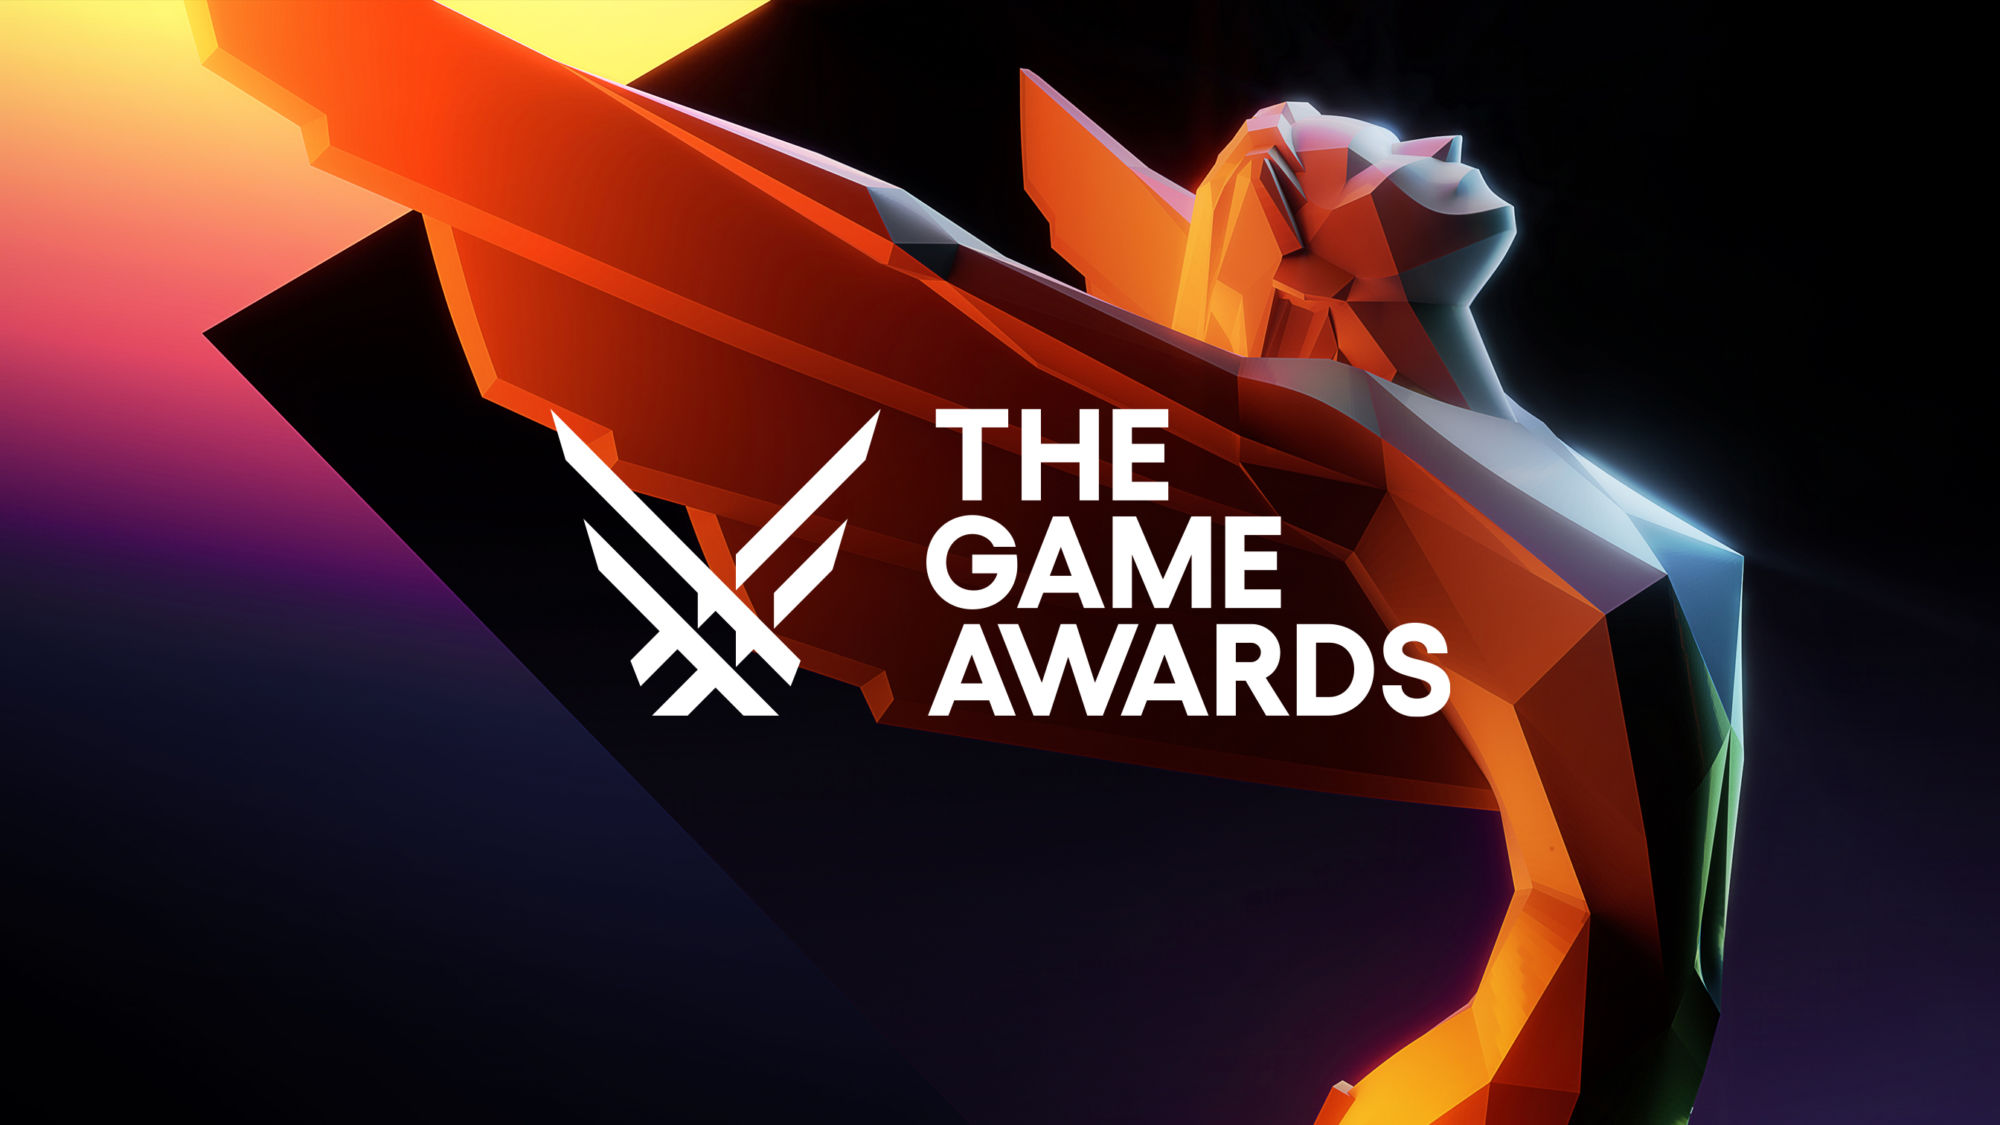 The Game Awards News, Rumors and Information - Bleeding Cool News Page 1